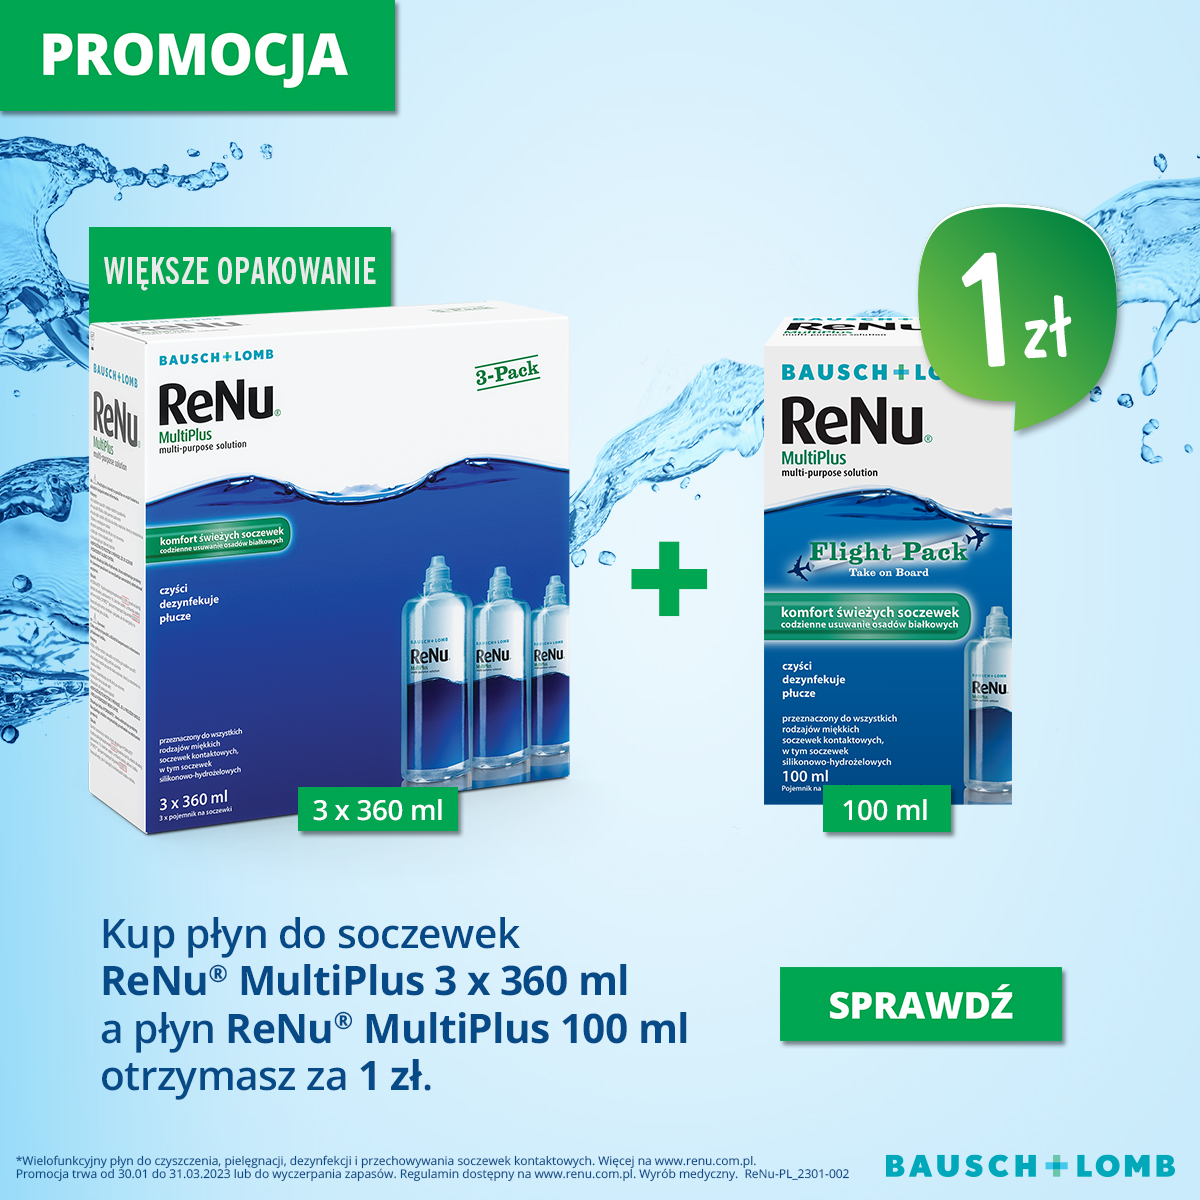 Receive 100 ml of liquid for PLN 1 to a three-pack of Renu Multiplus contact lens solutions